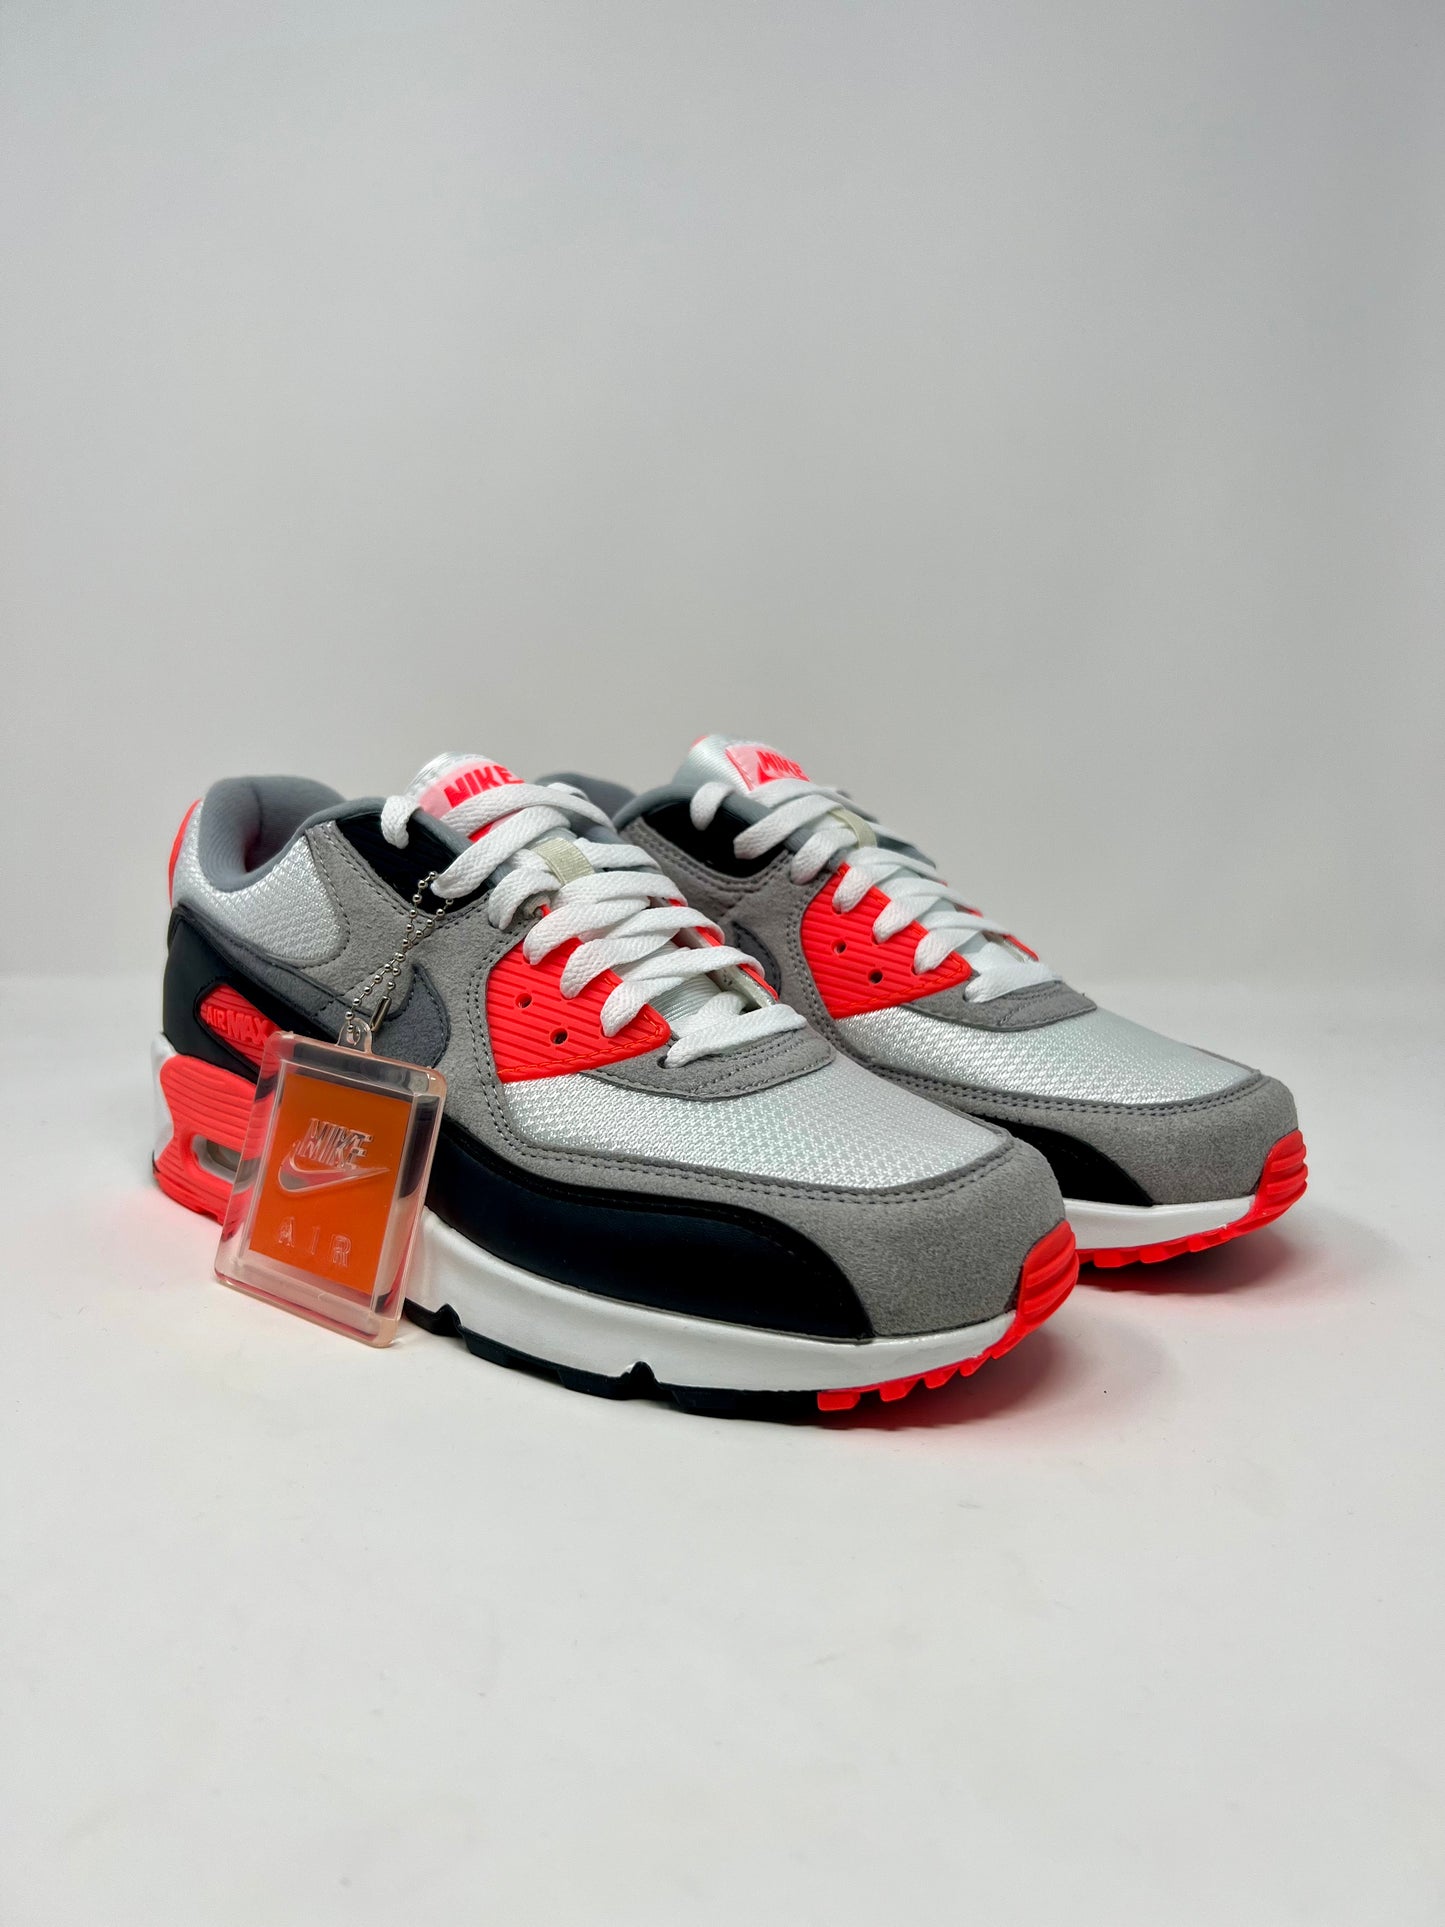 Nike Air Max 90 Infrared 2020 UK7.5 DS